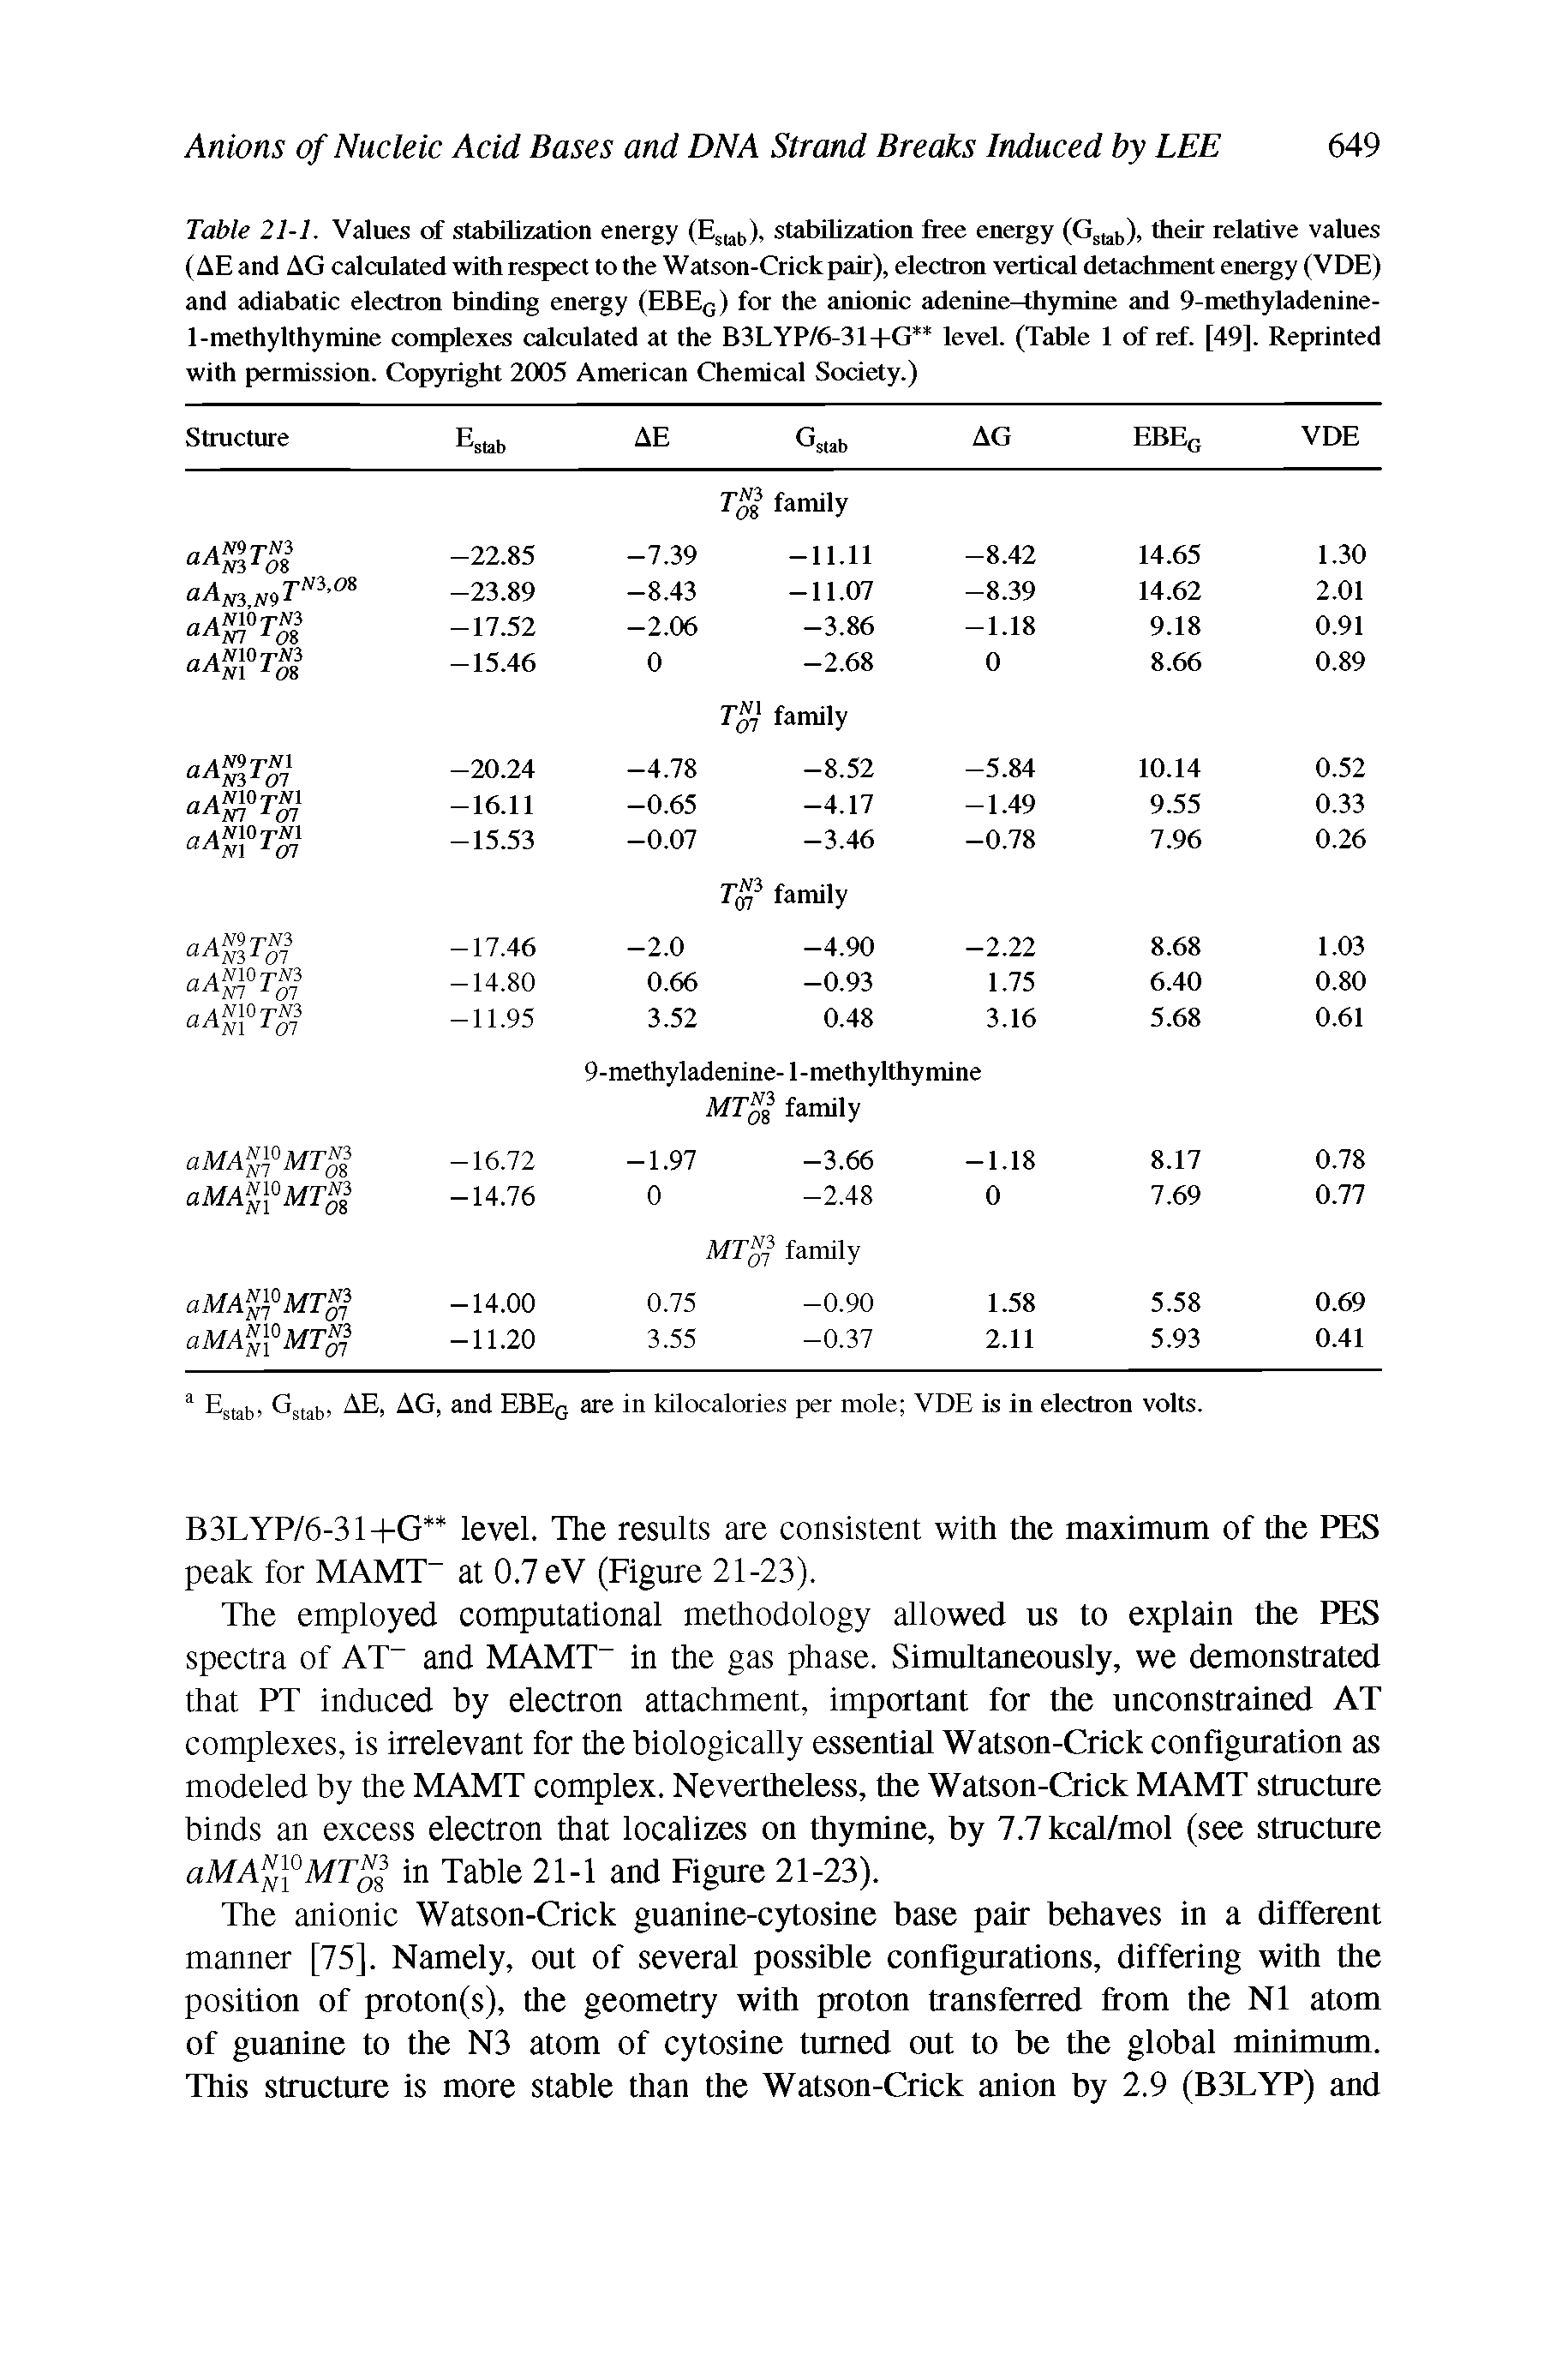 Table 21-1. Values of stabilization energy (Estab), stabilization free energy (Gslab), their relative values (AE and AG calculated with respect to the Watson-Crickpair), electron vertical detachment energy (VDE) and adiabatic electron binding energy (EBE0) for the anionic adenine-thymine and 9-methyladenine-1-methylthymine complexes calculated at the B3LYP/6-31+G level. (Table 1 of ref. [49]. Reprinted with permission. Copyright 2005 American Chemical Society.)...